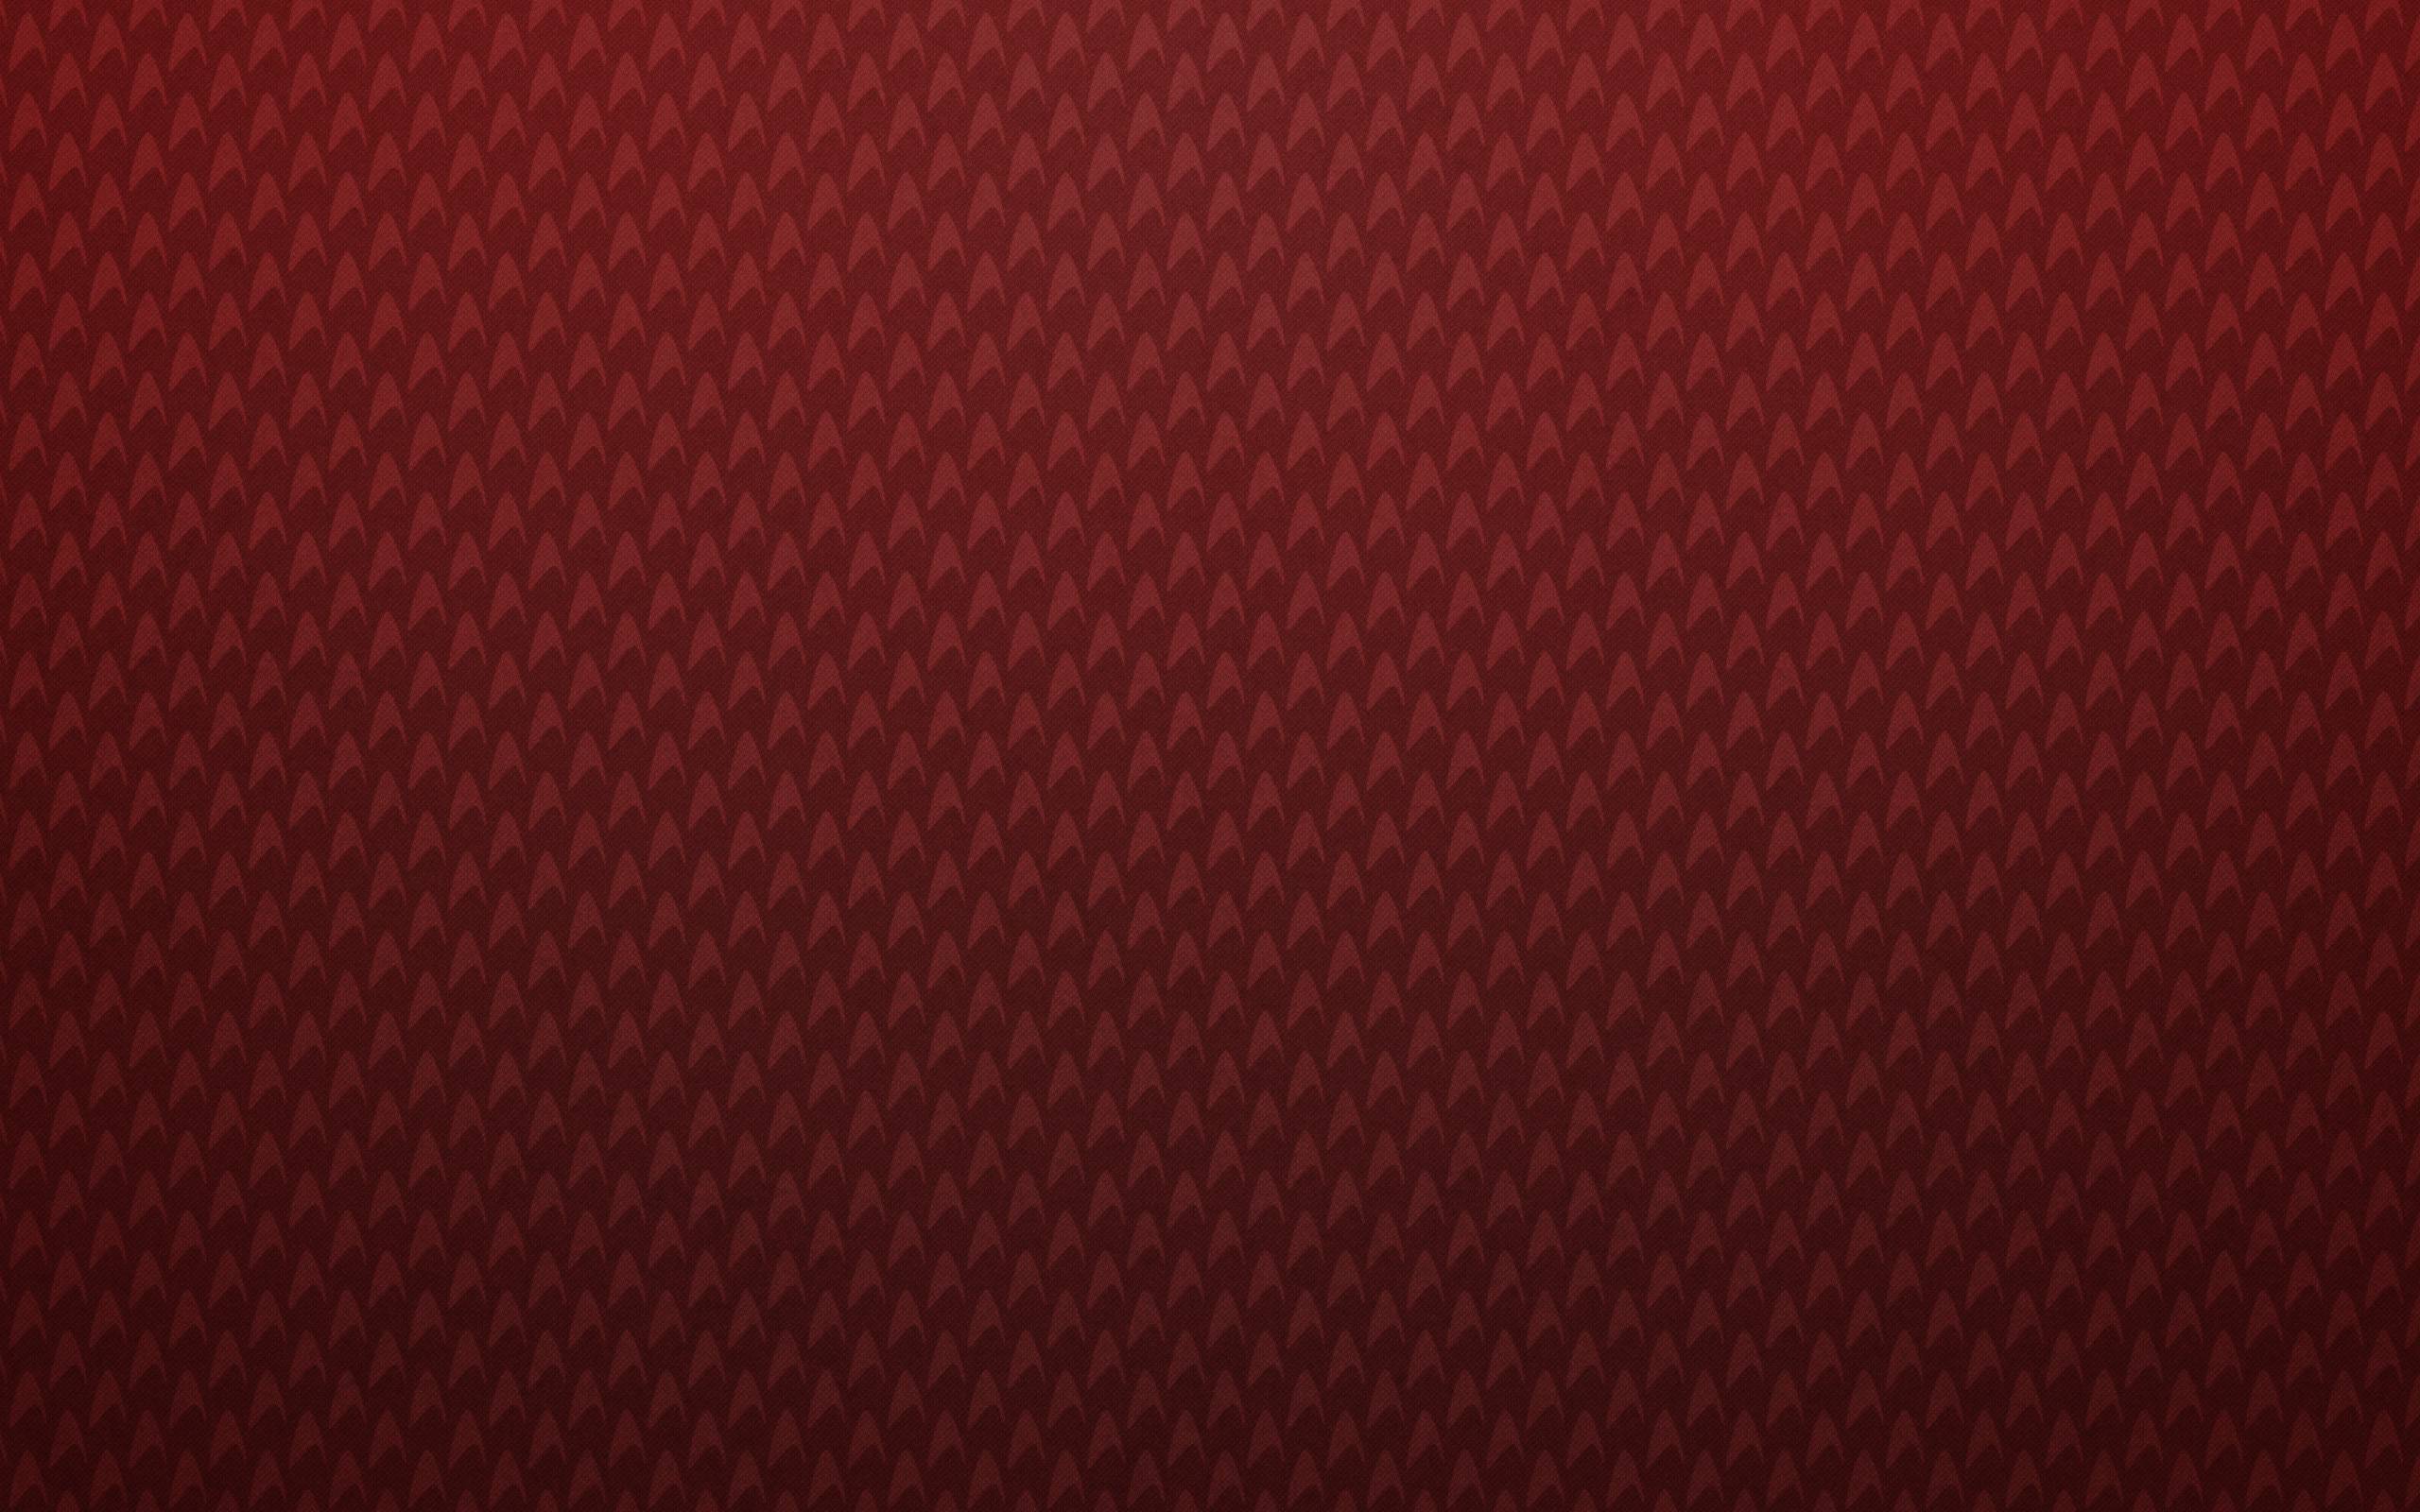 Red Leather Texture Wallpaper